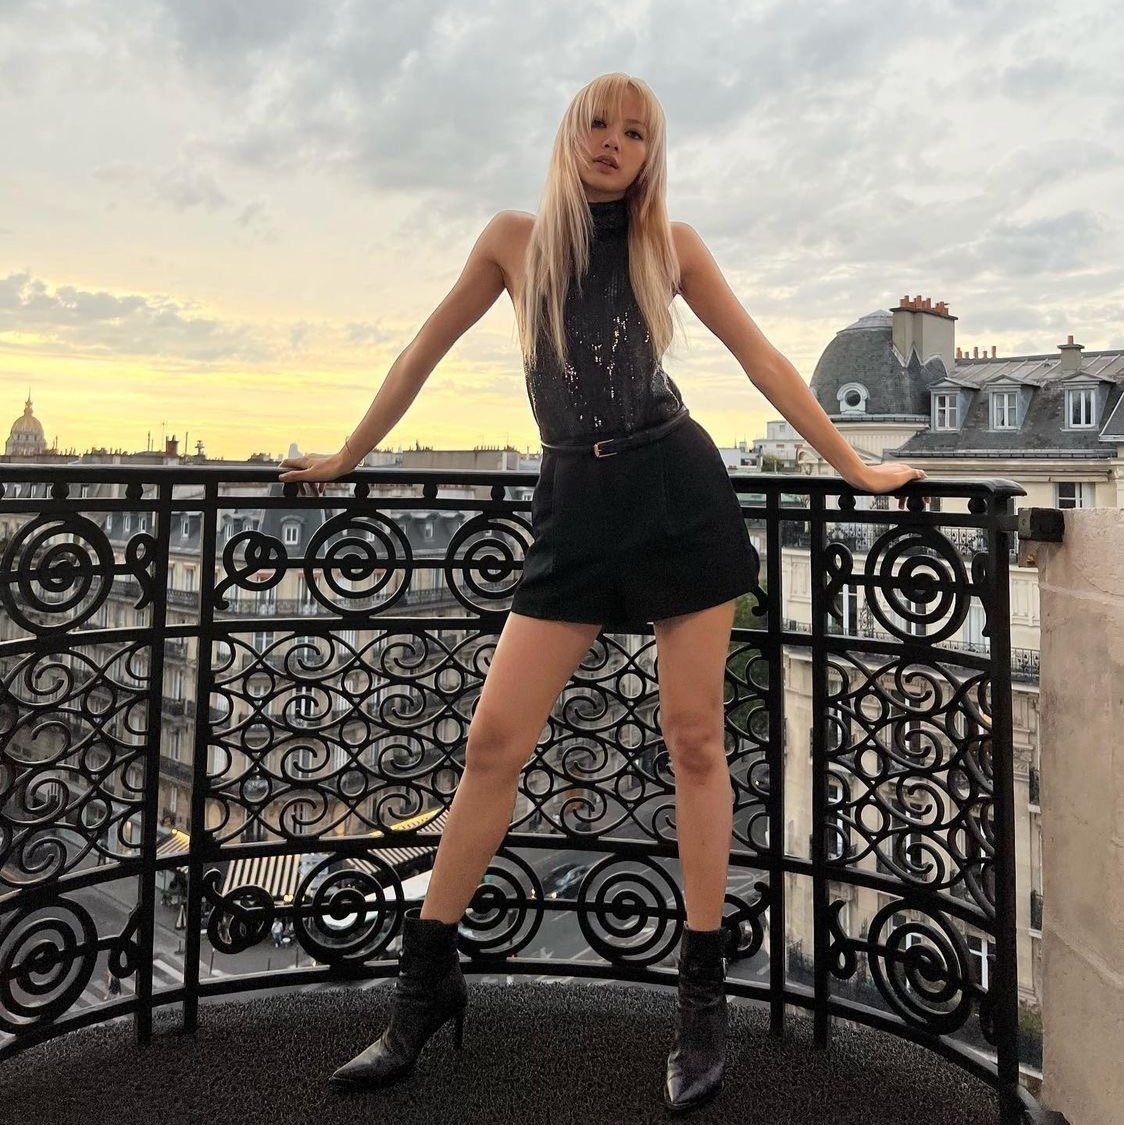 🗒 [INFO] - #LISAXCELINE has now surpassed 6 MILLION TWEETS becoming the FIRST and ONLY hashtag by a K-POP ACT to reach this milestone. ✨ LALISA HUMAN CELINE #LISAatCelinePFW22 #LISA #LALISA